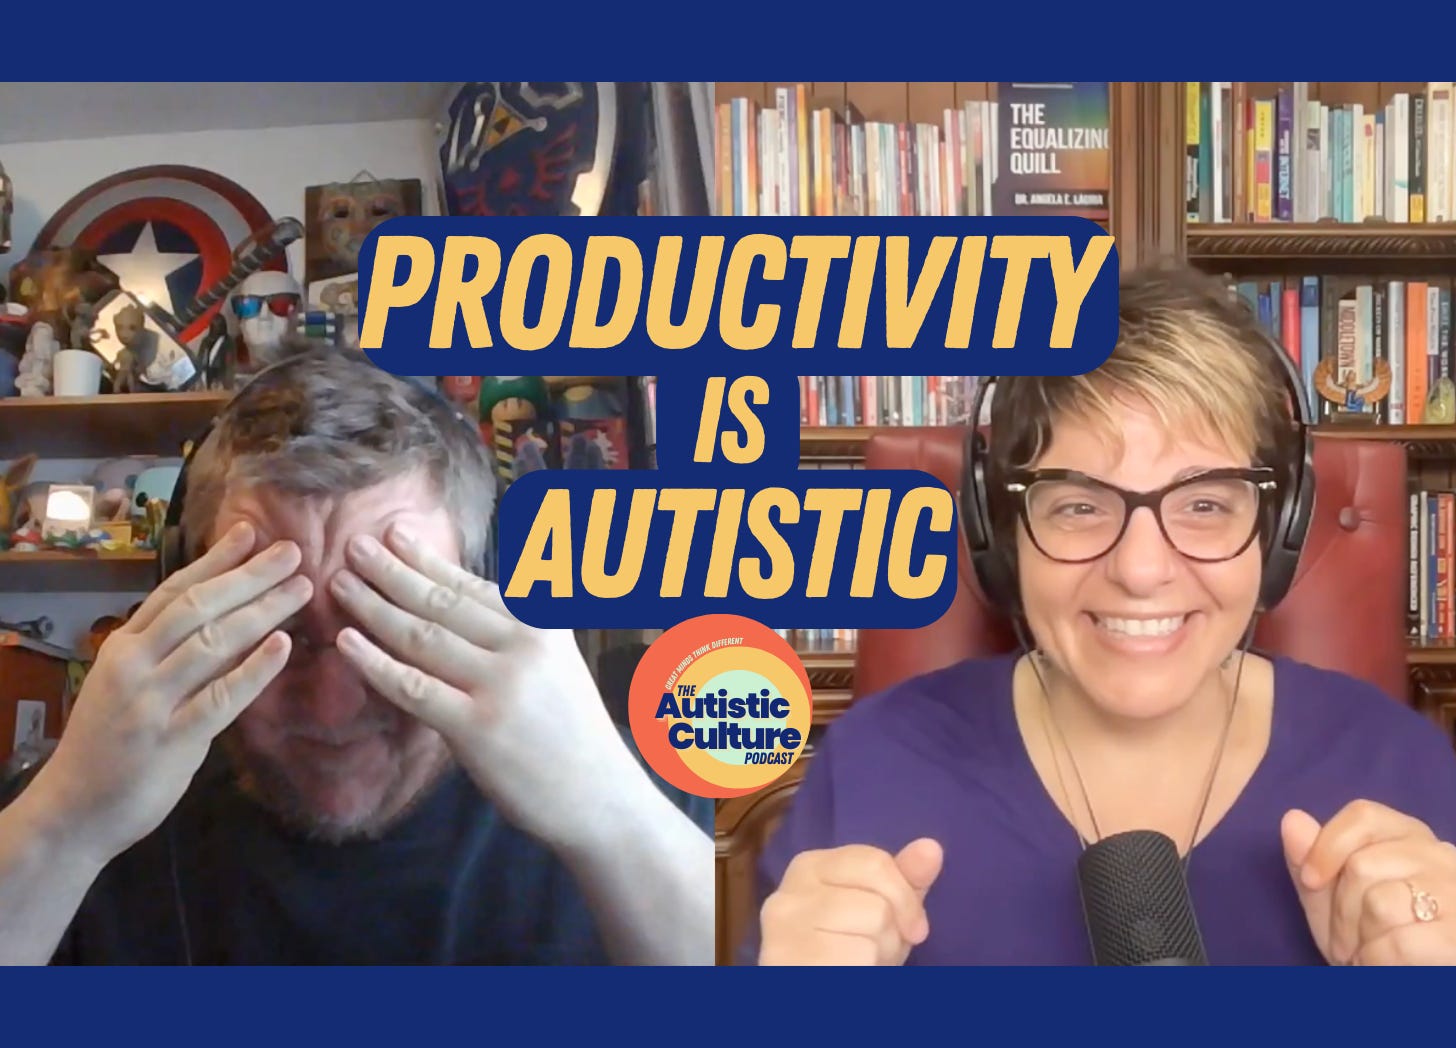 Listen to Autistic podcast hosts discuss: Why do Autistic people find it hard to change their habits and stay on schedule? Autism podcast | Avoid Autistic burnout and reduce shame--the truth about Autistic habits and productivity!